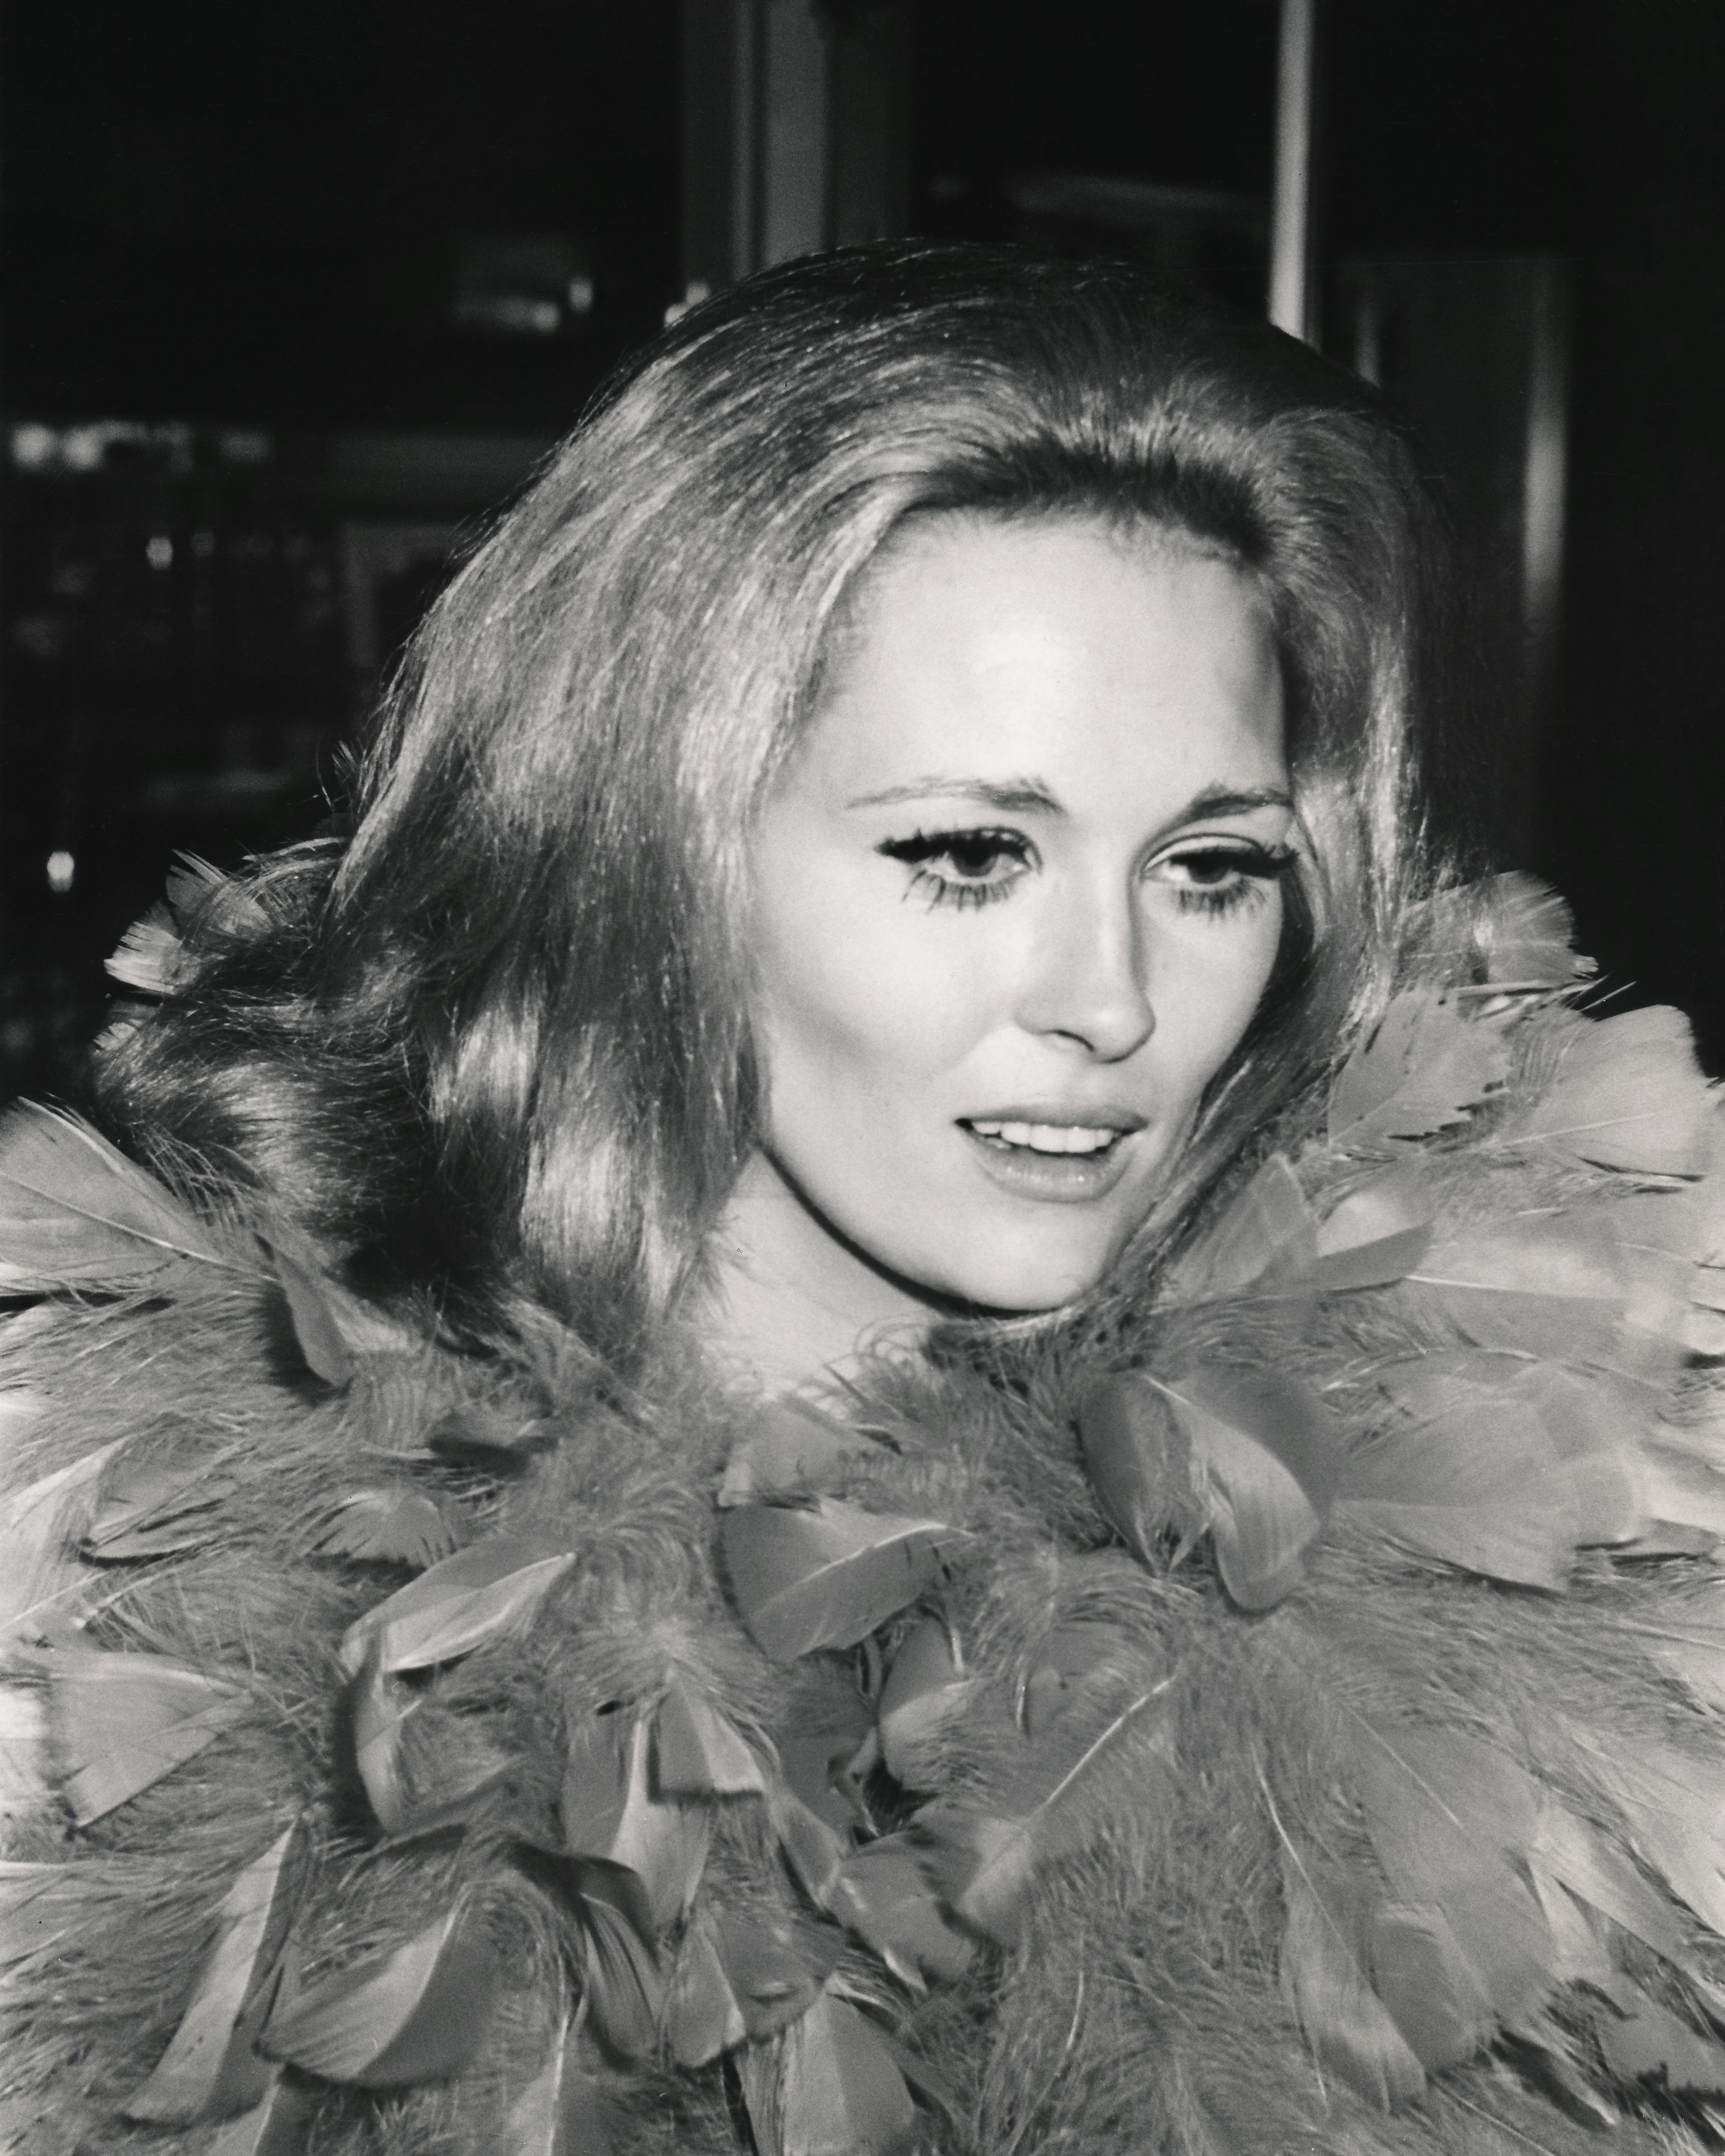 Unknown Portrait Photograph - Faye Dunaway Candid in Feathers Fine Art Print